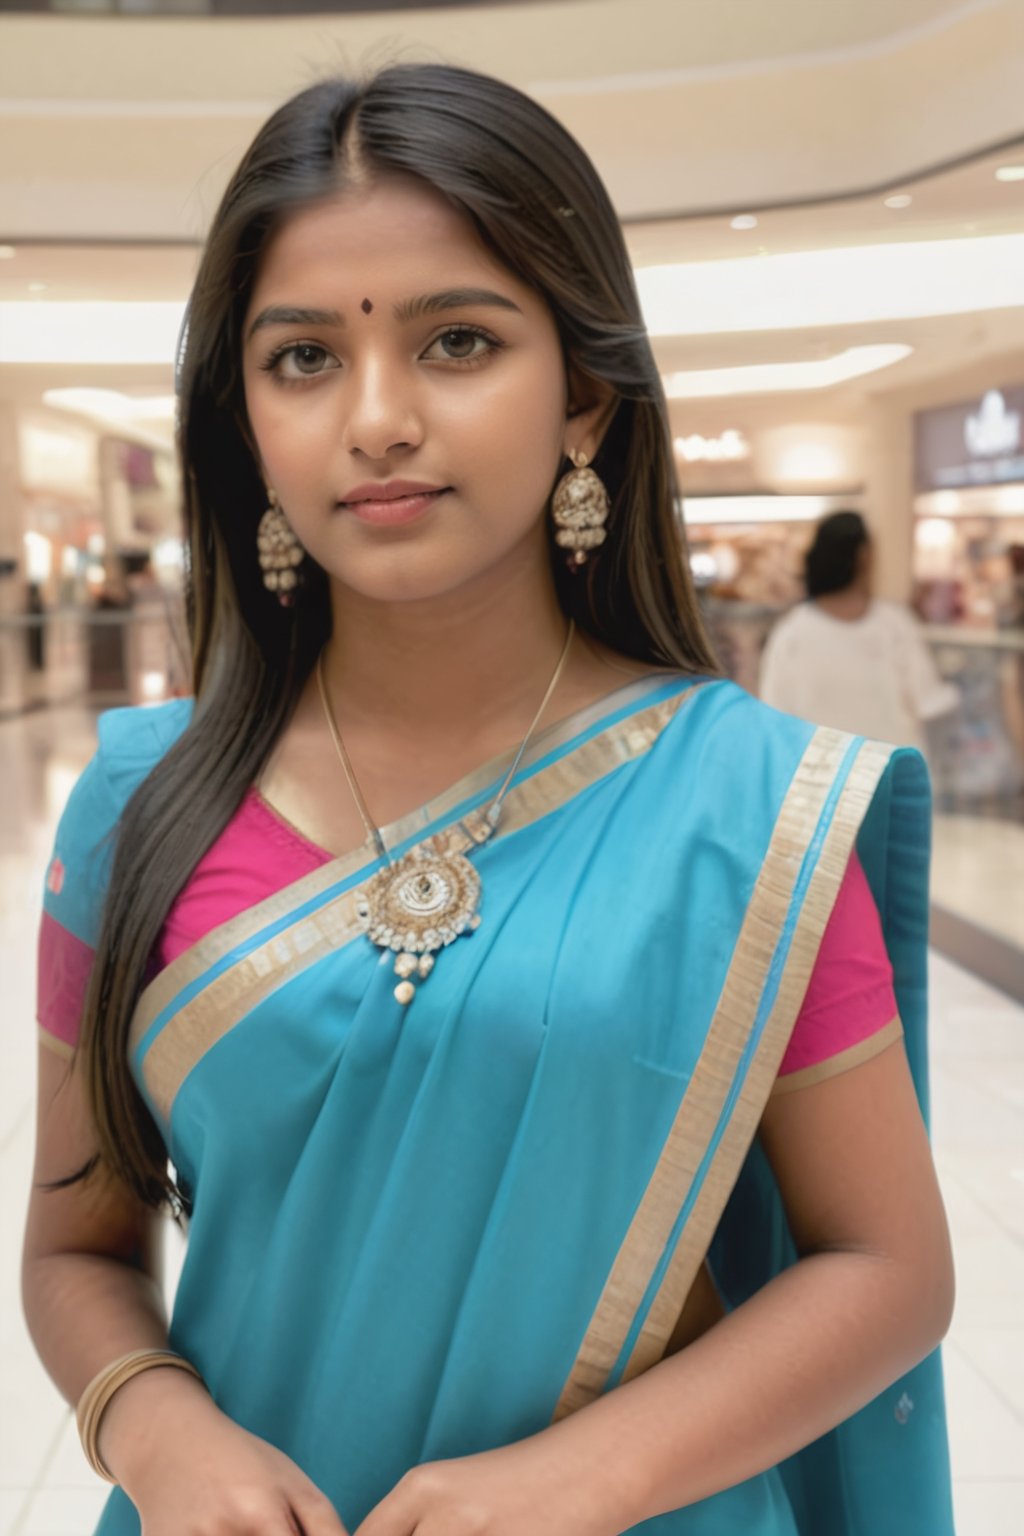  18 years Indian girl,  realistic image, at mall
